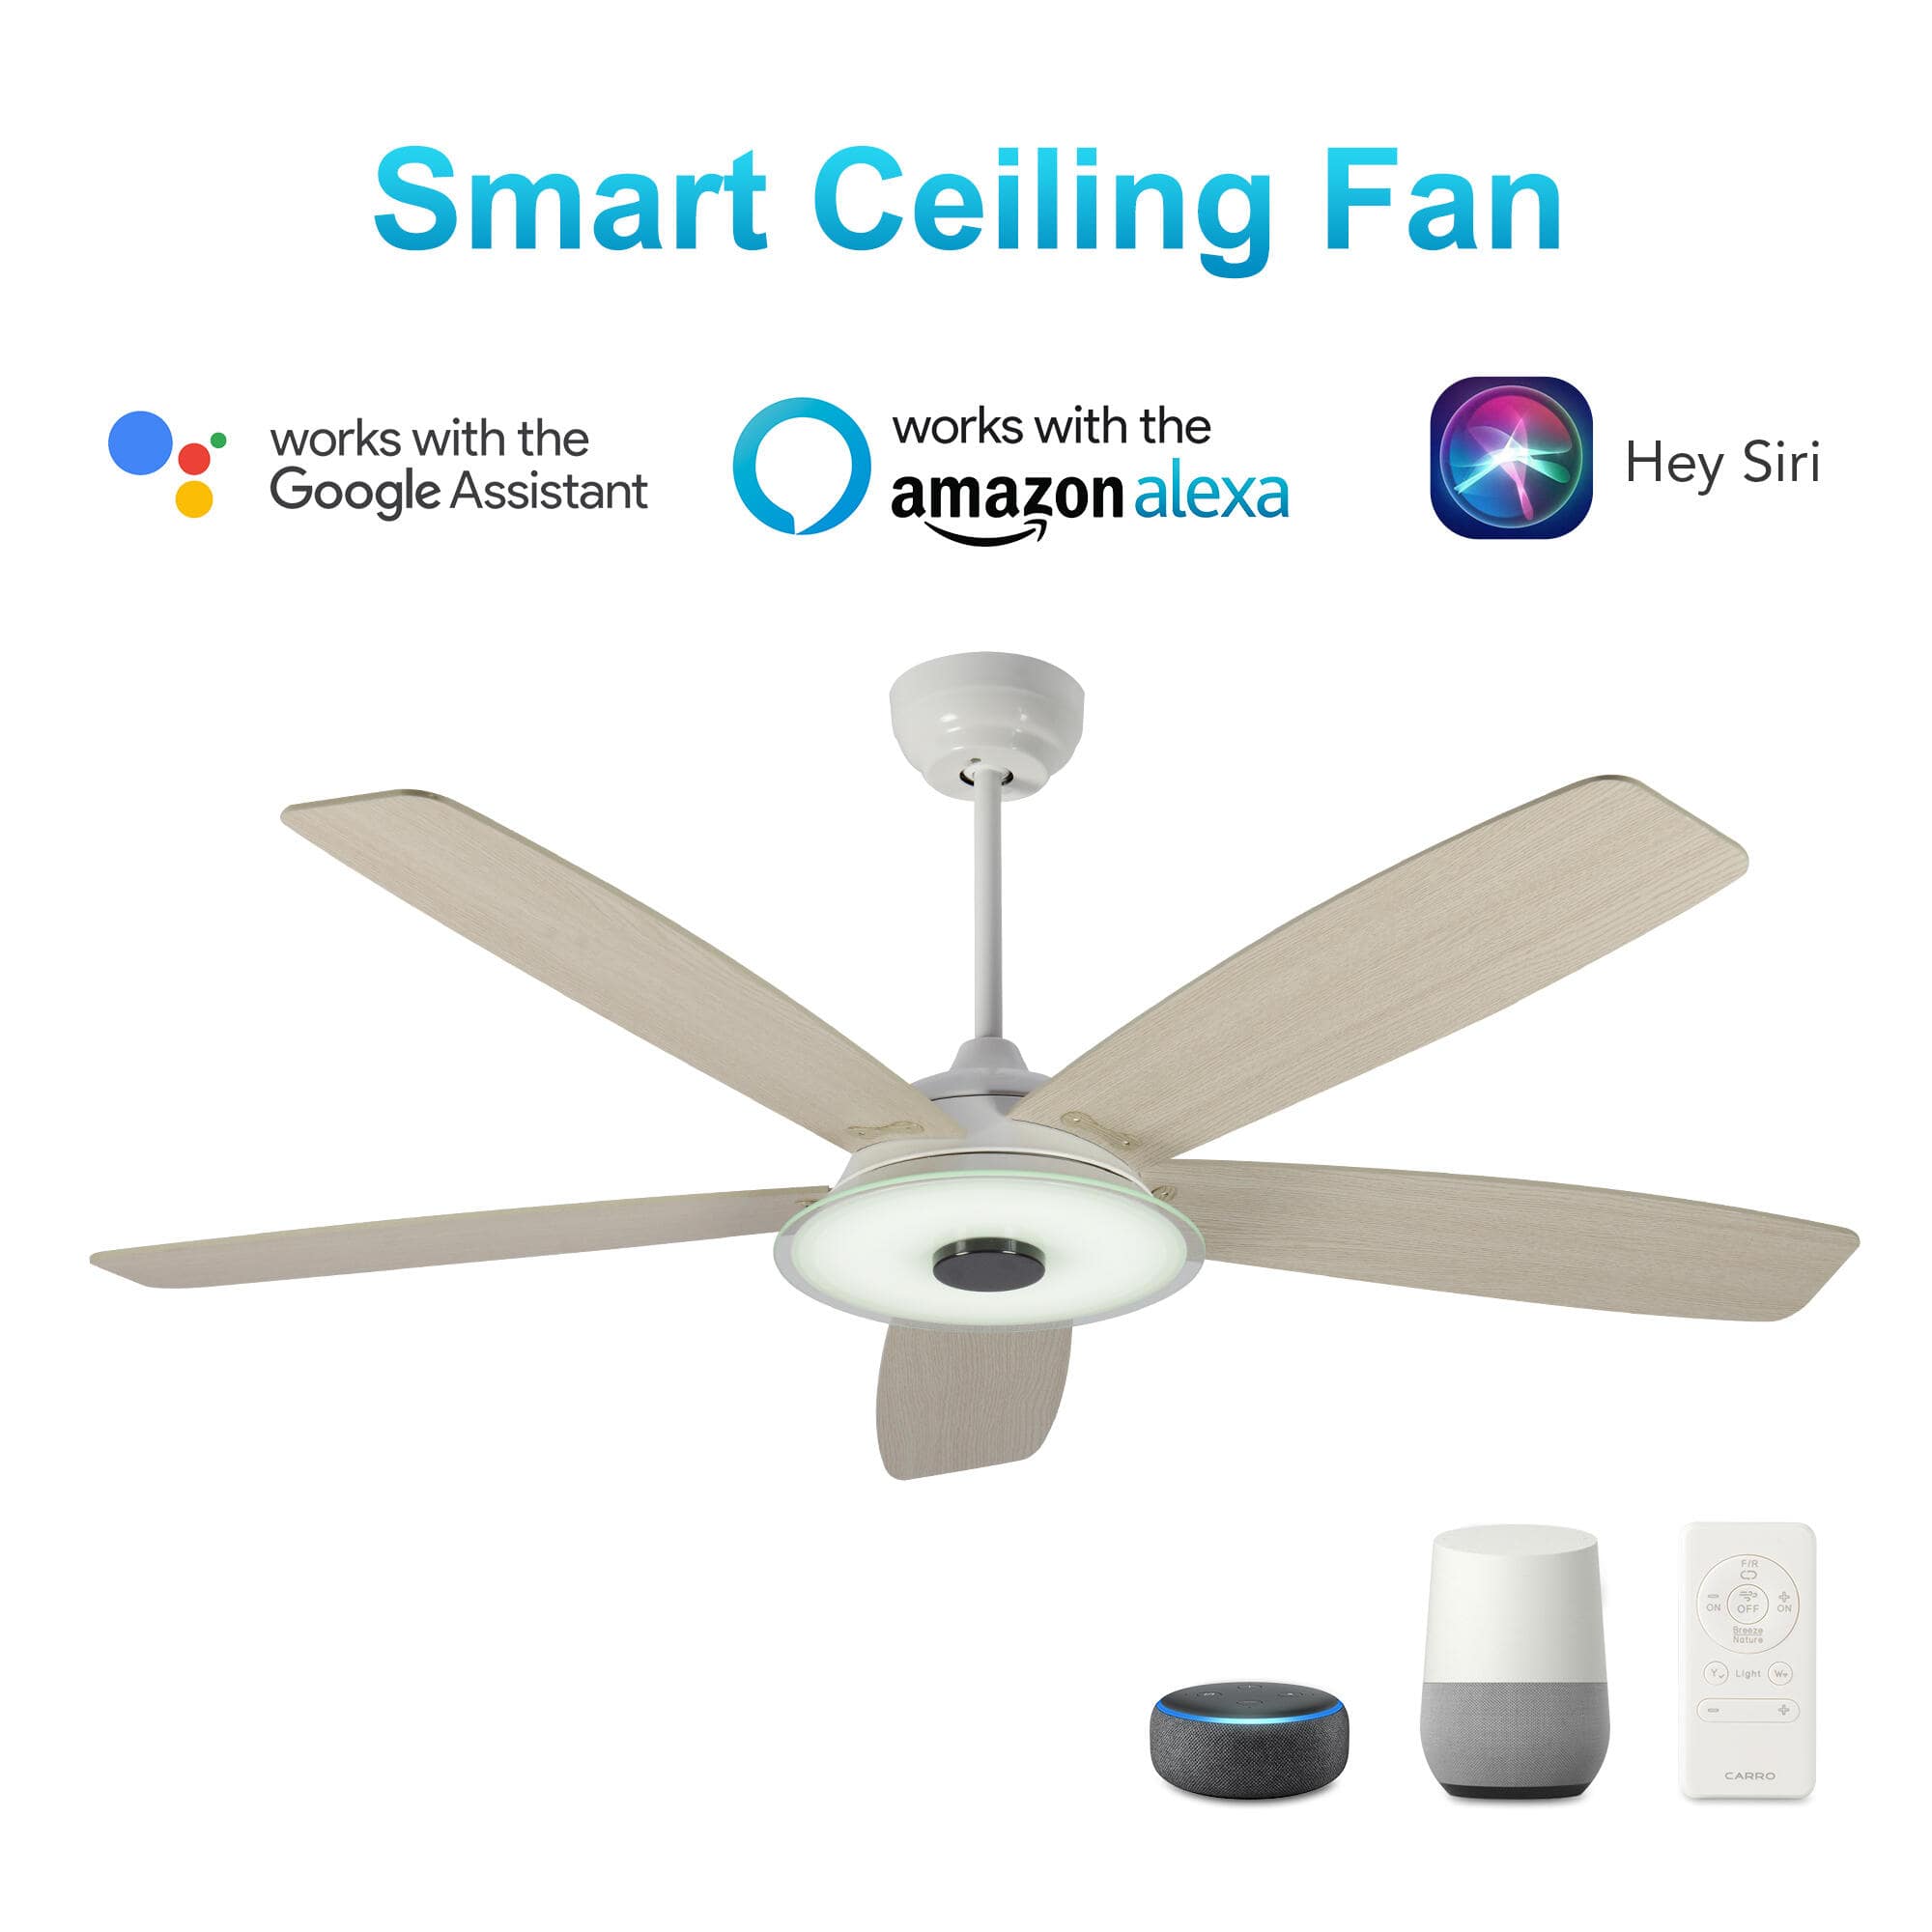 Striker White/Wood 5 Blade Smart Ceiling Fan with Dimmable LED Light Kit Works with Remote Control, Wi-Fi apps and Voice control via Google Assistant/Alexa/Siri